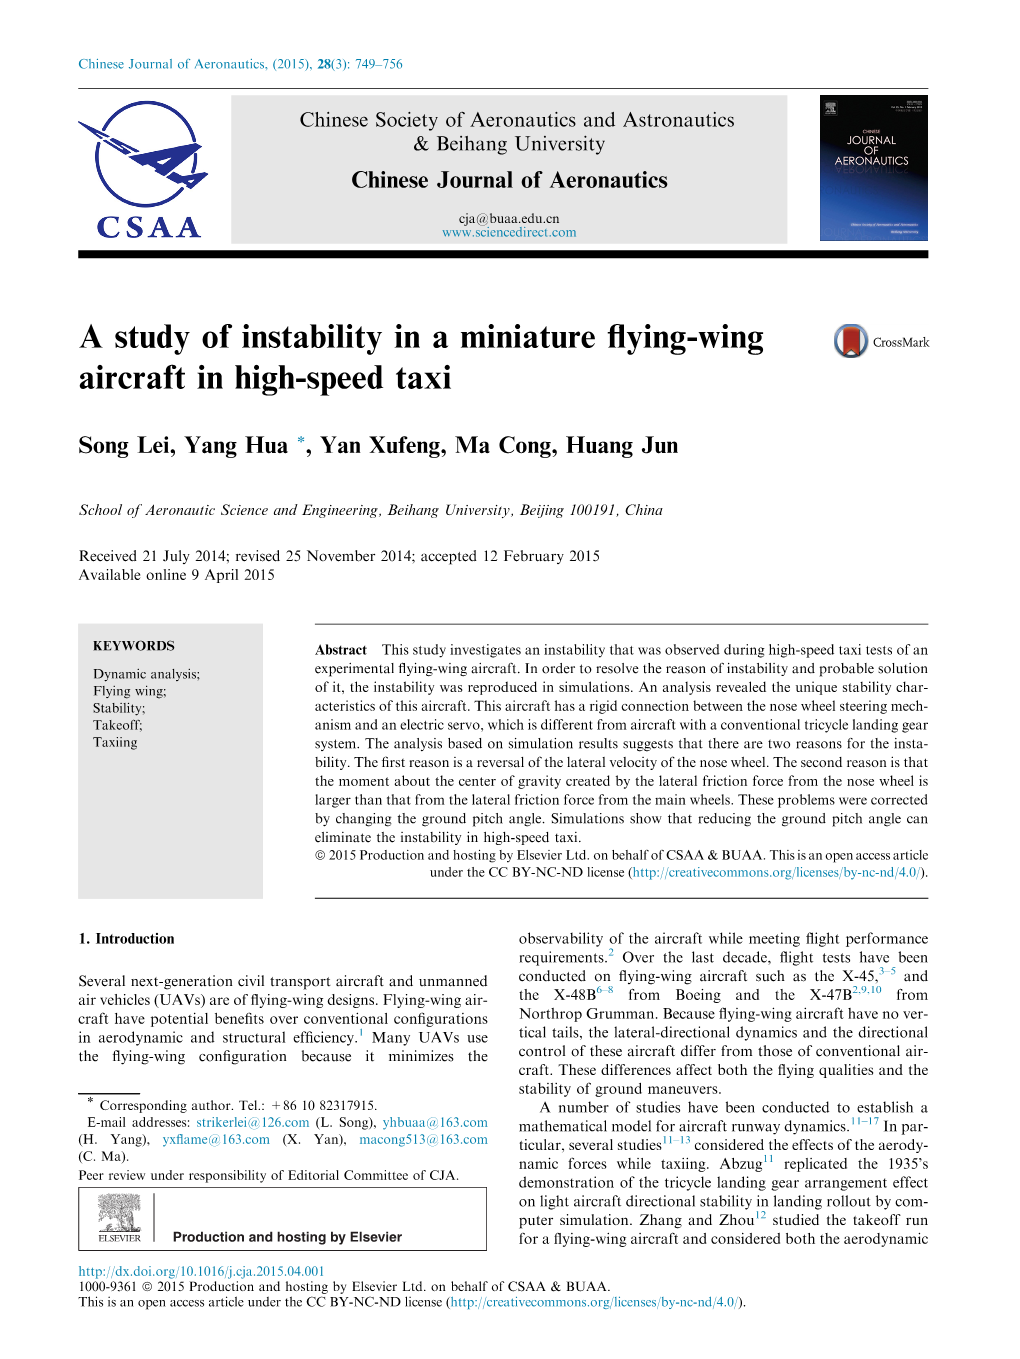 A Study of Instability in a Miniature Flying-Wing Aircraft in High-Speed Taxi